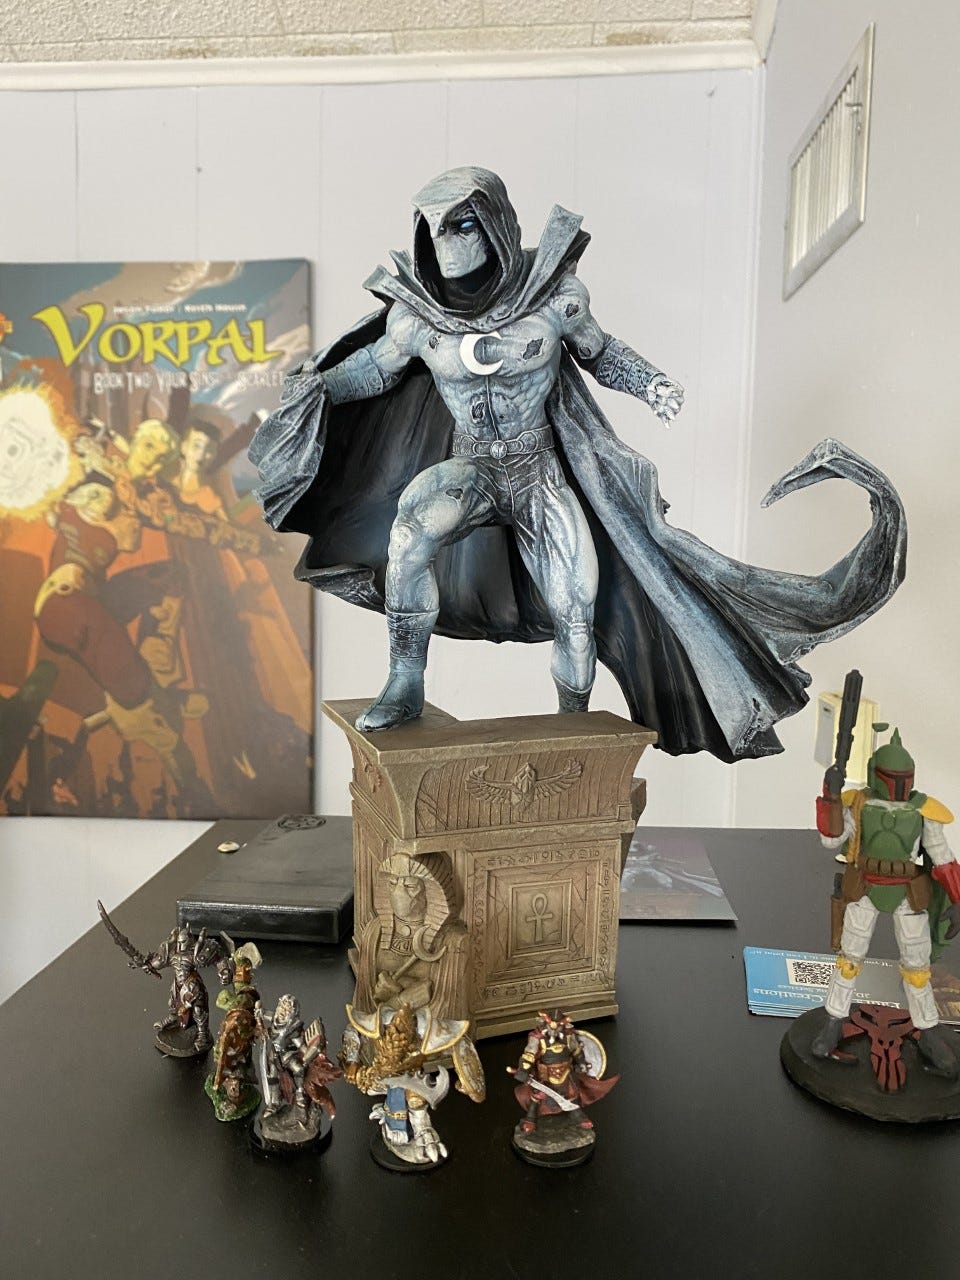 This limited edition statue of Moon Knight from Marvel Comics is an example of the kind of collectible merchandise customers can expect to find.